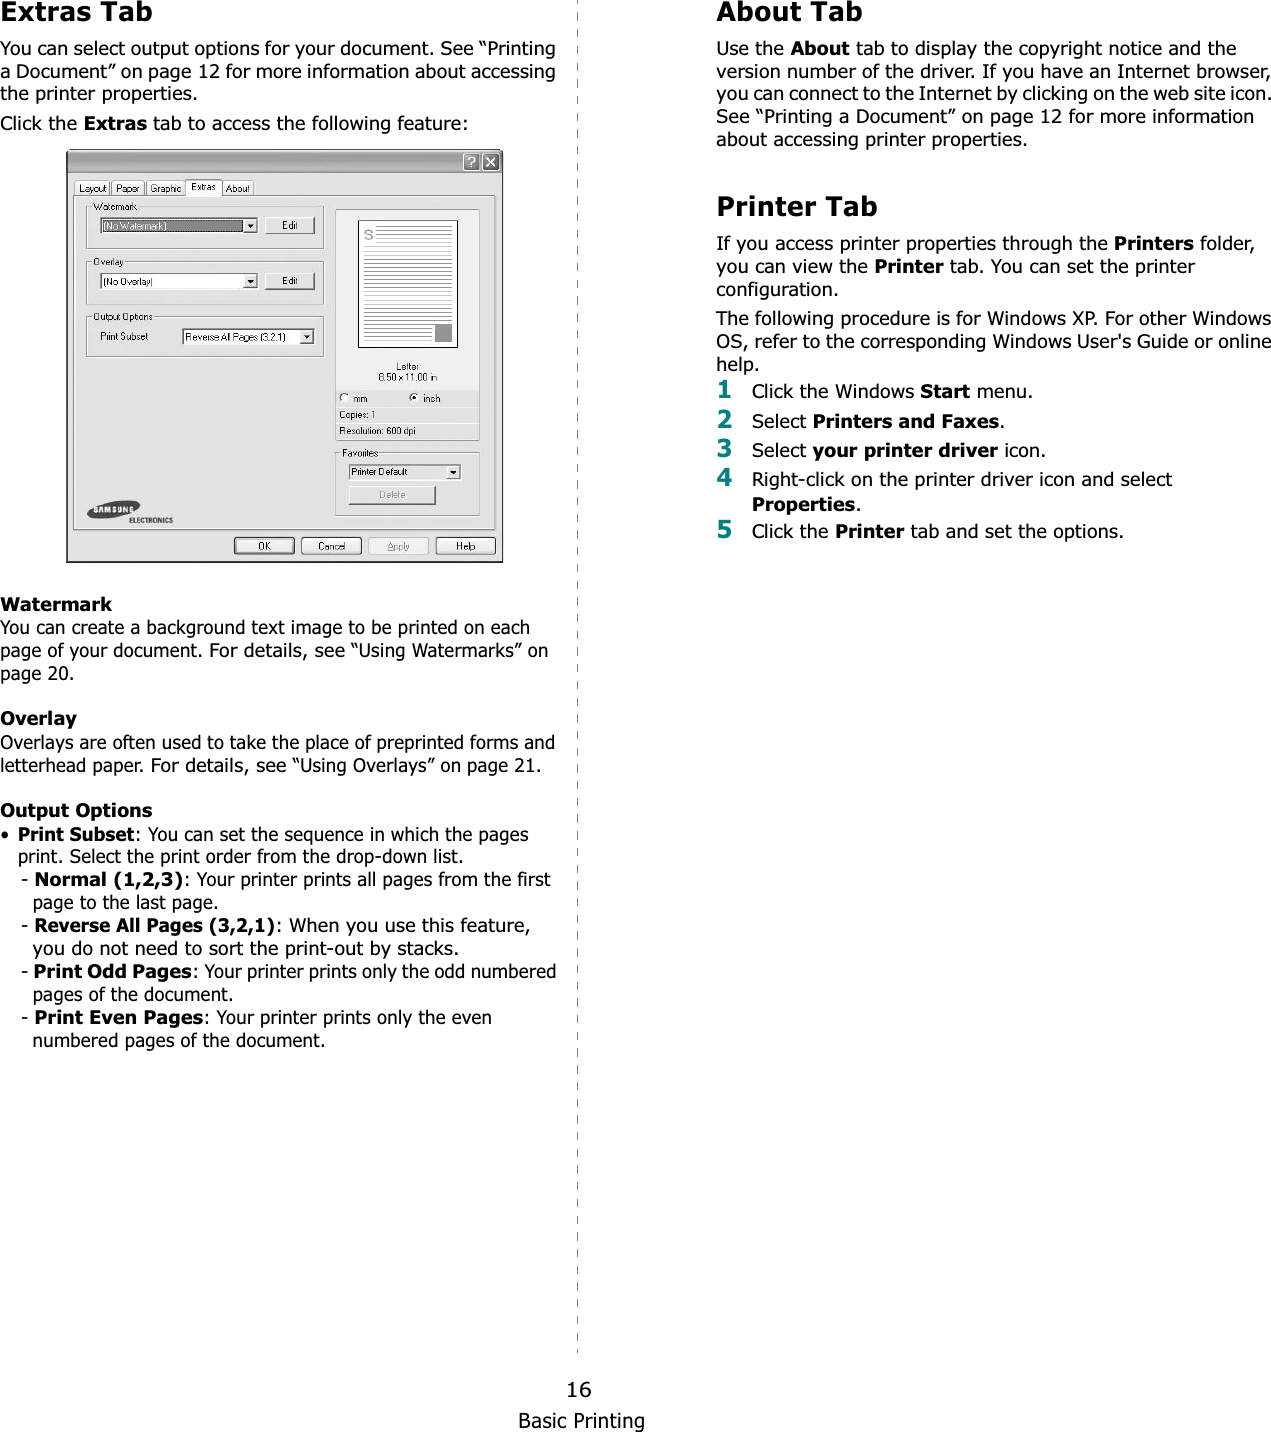 Basic Printing16Extras TabYou can select output options for your document. See “Printing a Document” on page 12 for more information about accessing the printer properties.Click the Extras tab to access the following feature:  WatermarkYou can create a background text image to be printed on each page of your document. For details, see “Using Watermarks” on page 20.OverlayOverlays are often used to take the place of preprinted forms and letterhead paper. For details, see “Using Overlays” on page 21.Output Options•Print Subset: You can set the sequence in which the pages print. Select the print order from the drop-down list.-Normal (1,2,3): Your printer prints all pages from the first page to the last page.-Reverse All Pages (3,2,1):When you use this feature, you do not need to sort the print-out by stacks. -Print Odd Pages: Your printer prints only the odd numbered pages of the document.-Print Even Pages: Your printer prints only the even numbered pages of the document.About TabUse the About tab to display the copyright notice and the version number of the driver. If you have an Internet browser, you can connect to the Internet by clicking on the web site icon. See “Printing a Document” on page 12 for more information about accessing printer properties.Printer TabIf you access printer properties through the Printers folder, you can view the Printer tab. You can set the printer configuration.The following procedure is for Windows XP. For other Windows OS, refer to the corresponding Windows User&apos;s Guide or online help.1Click the Windows Start menu. 2Select Printers and Faxes.3Select your printer driver icon. 4Right-click on the printer driver icon and select Properties.5Click the Printer tab and set the options.  